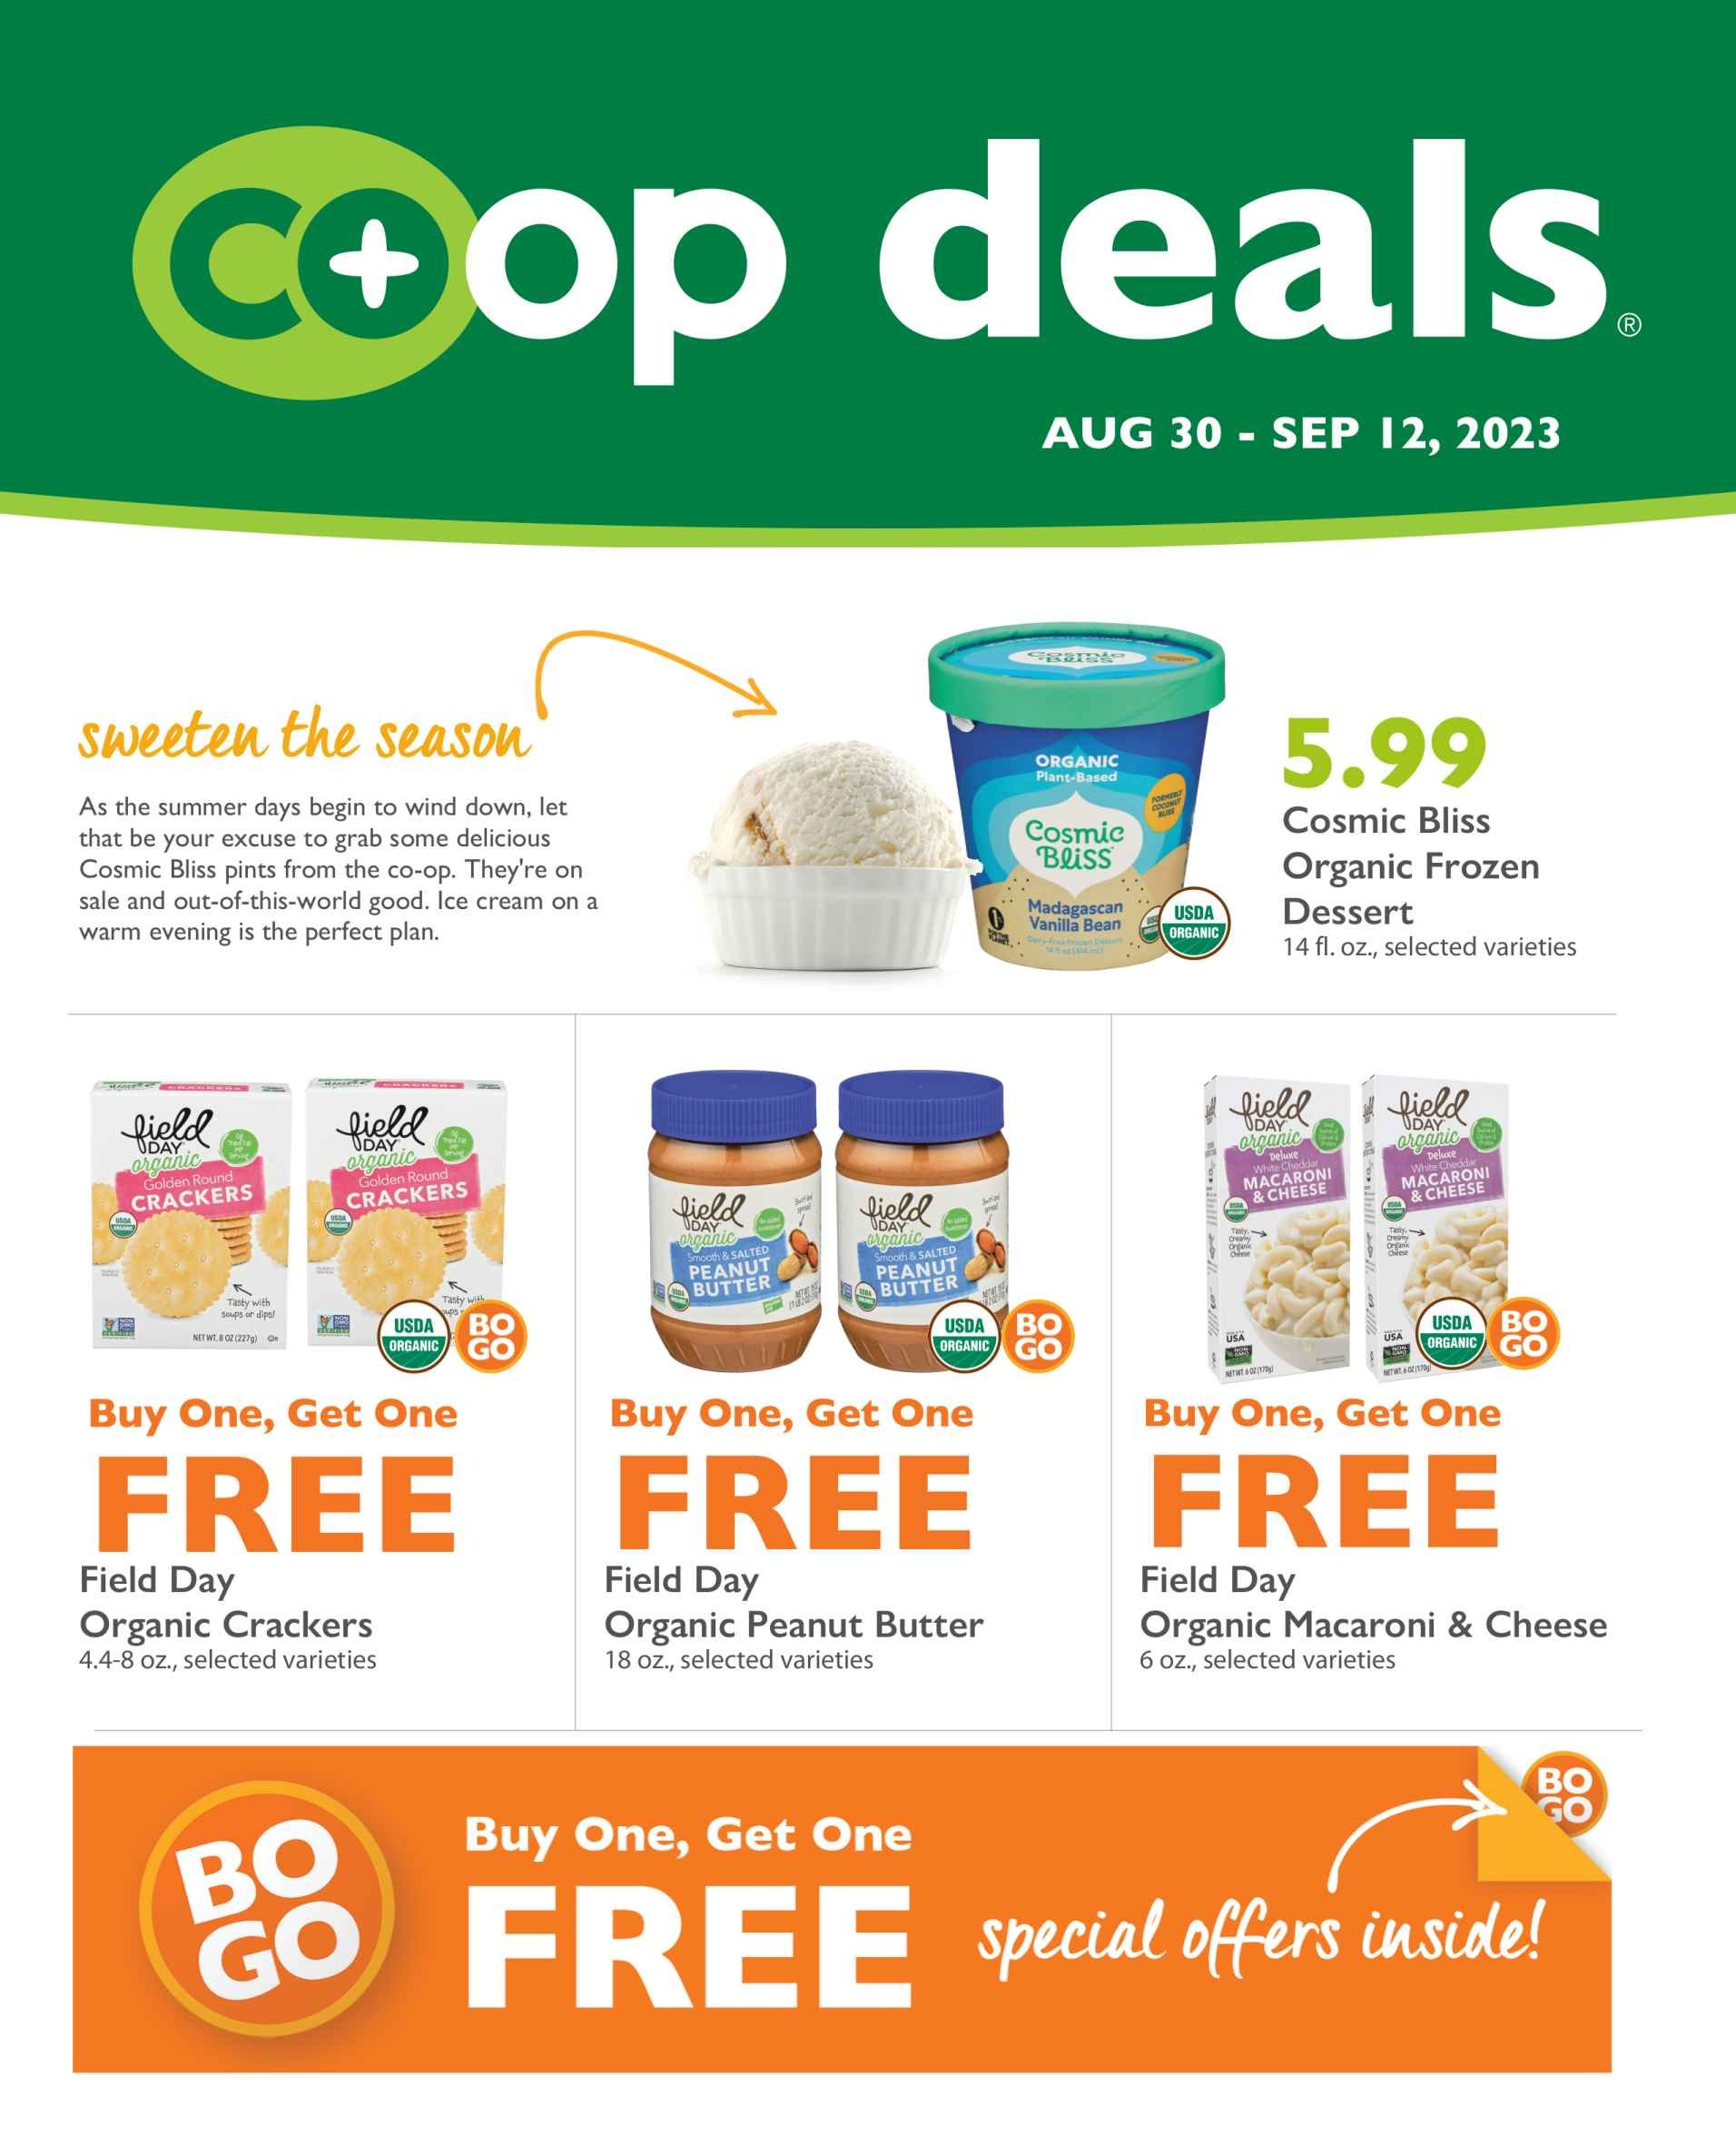 Co+op_Deals_Sep_2023_Flyer_Central_A_Page Cover Aug30-Sept12.jpg